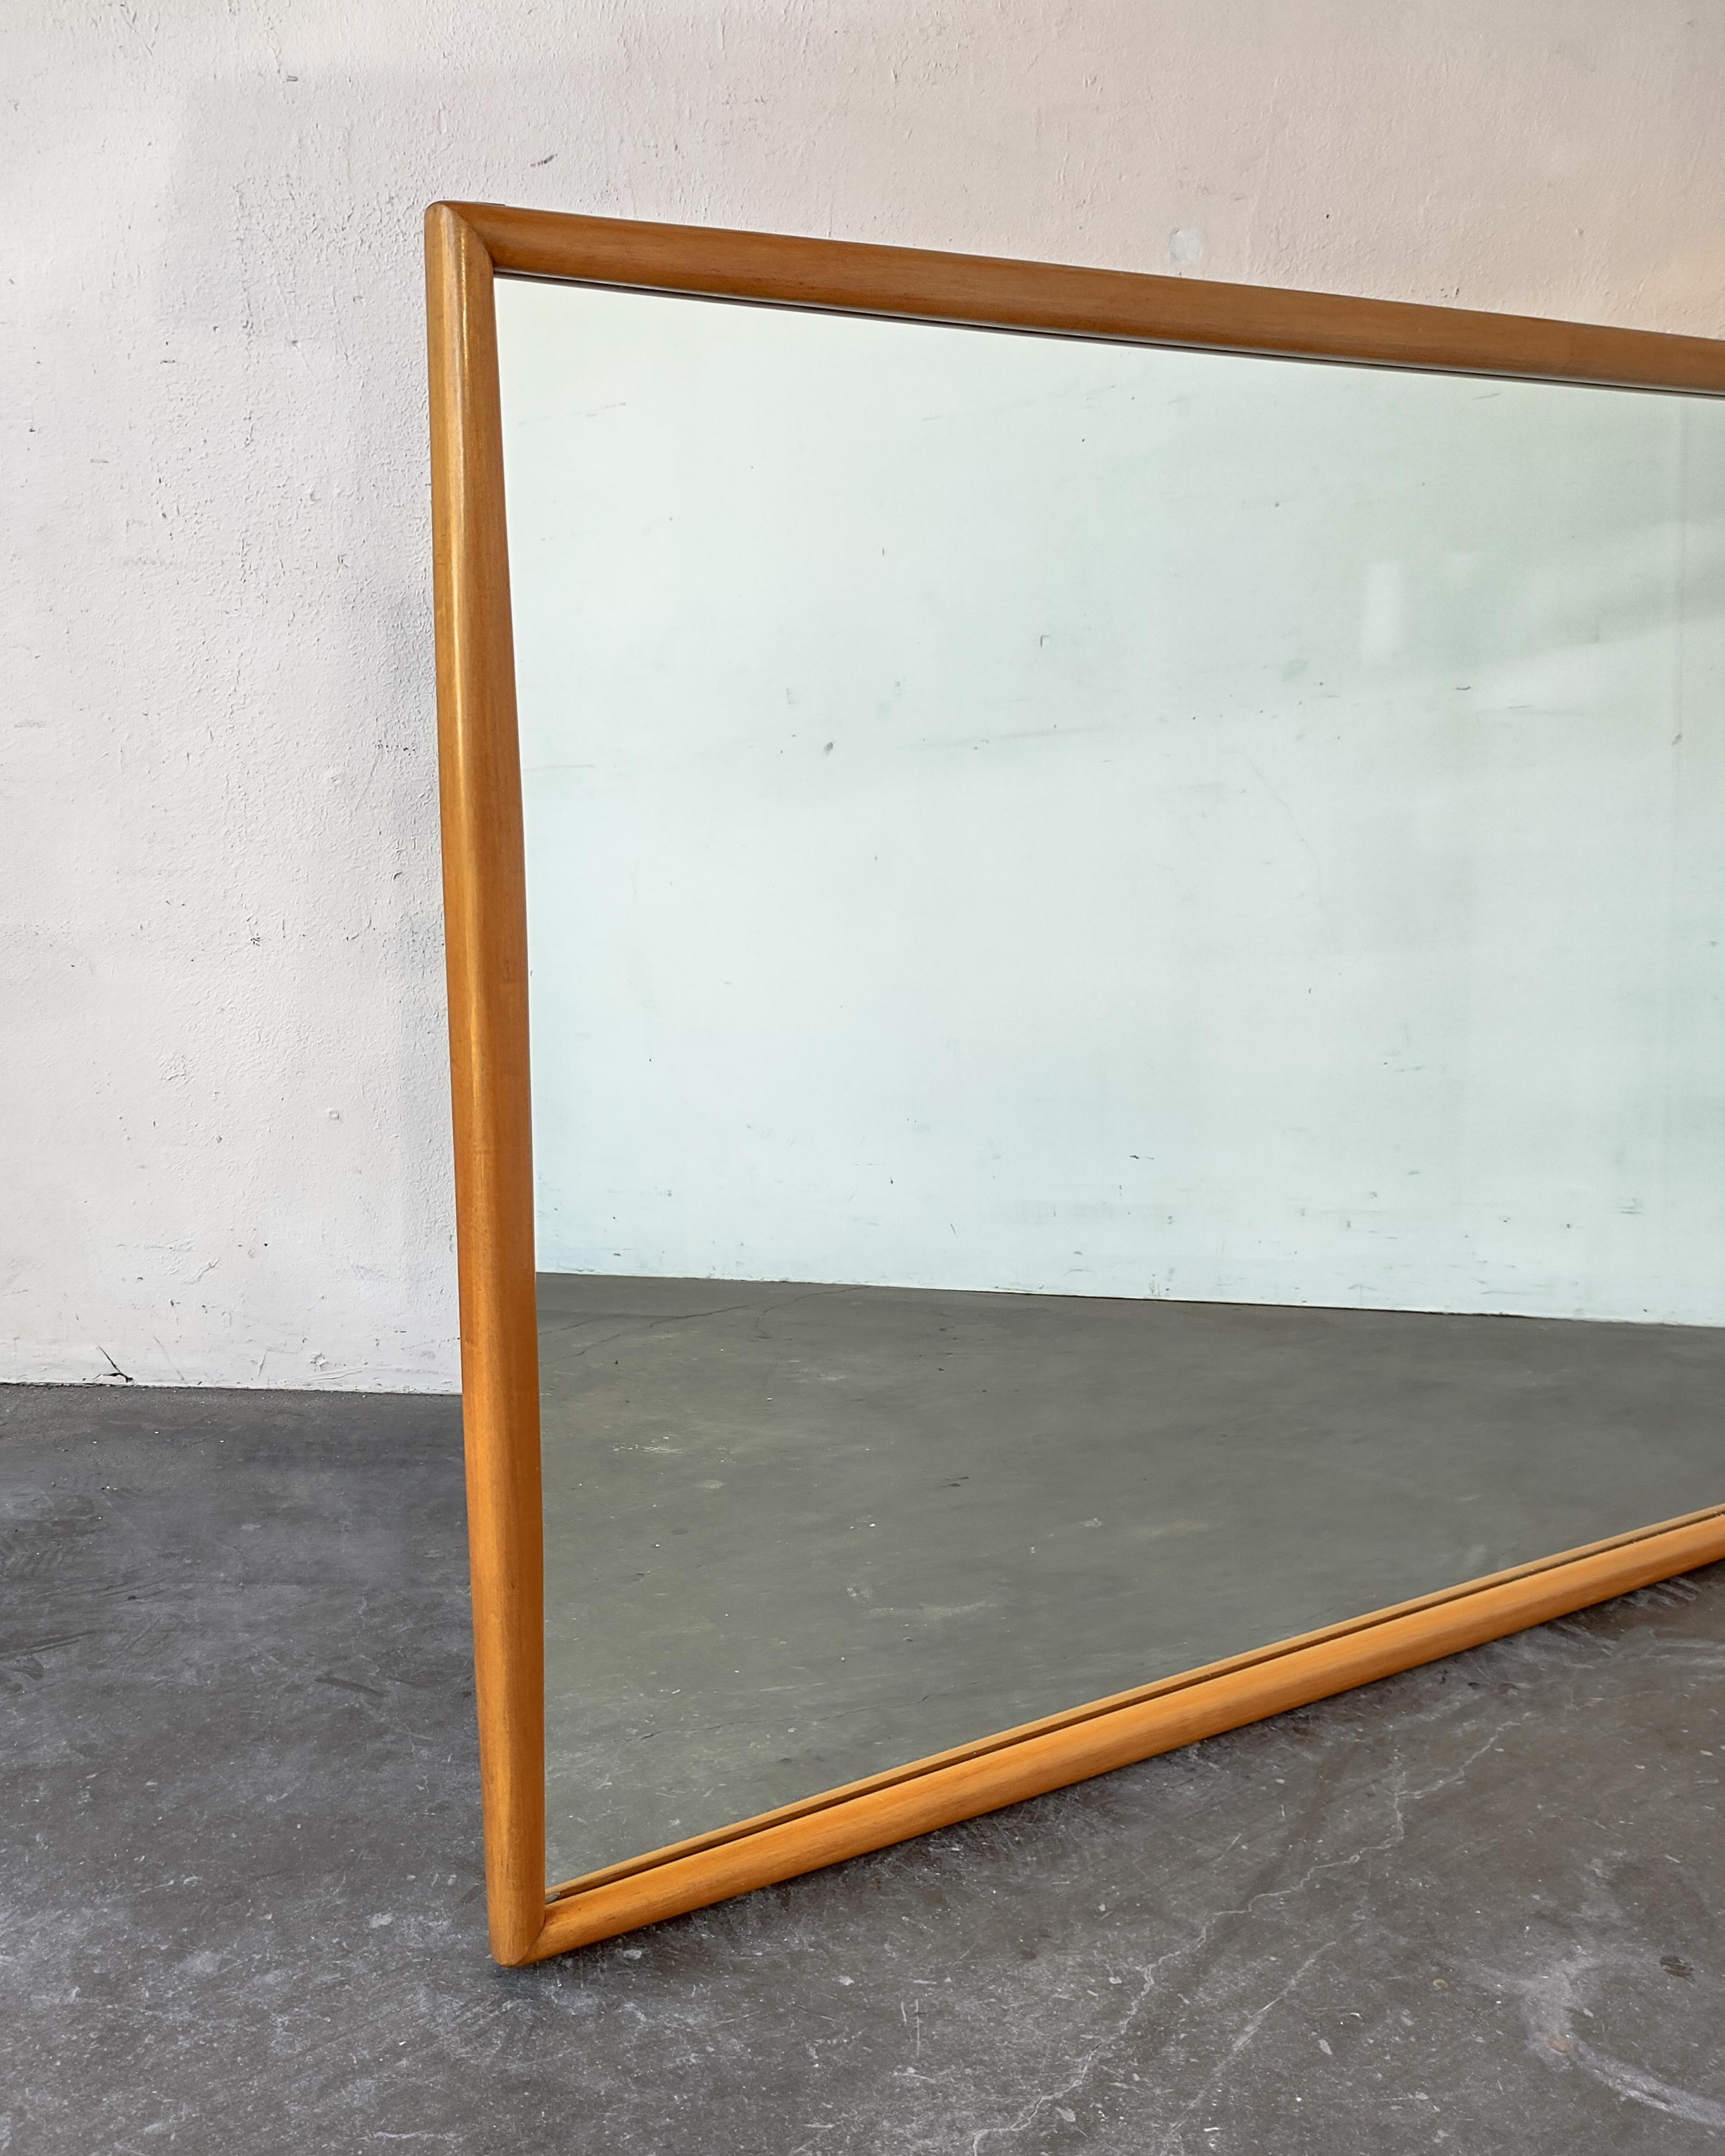 Large Heywood Wakefield blonde wood framed mirror circa 1940s/50s. Lovely design where the wood tapers at each corner. Overall great vintage condition, some very light wear. Hanging hardware attached upon request, can be hung horizontal or